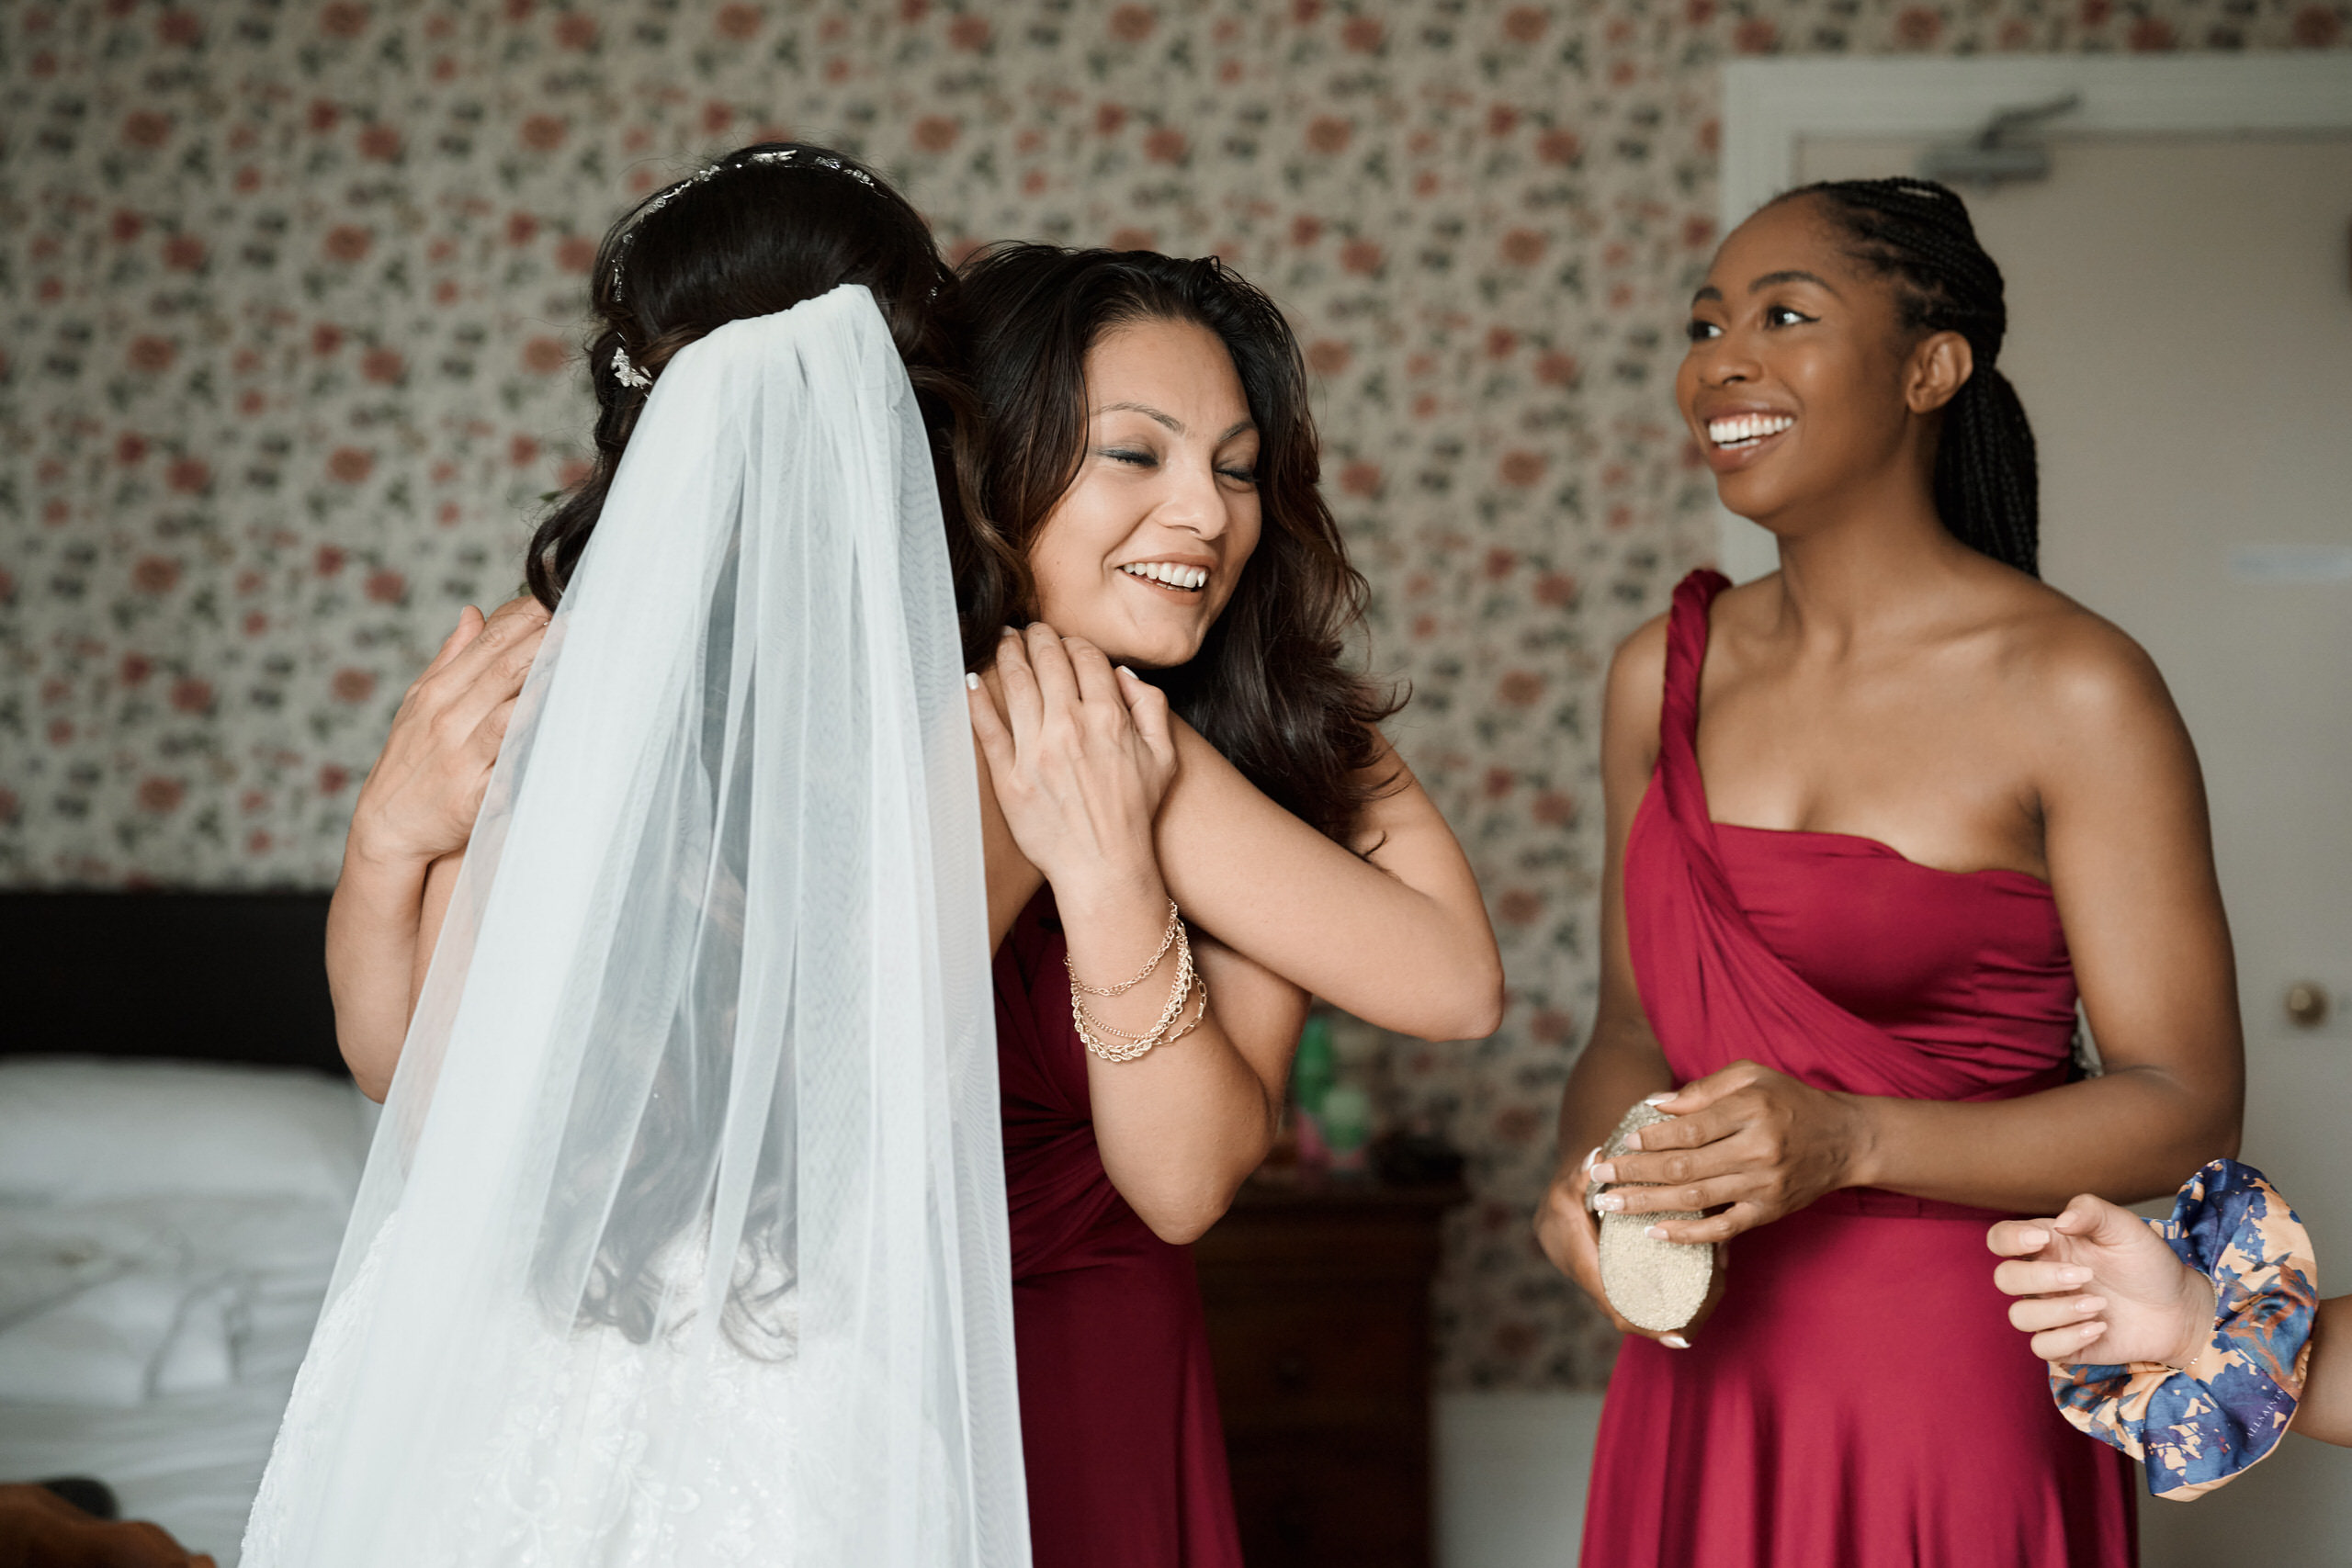 A woman in a red dress is with a bridesmaid.